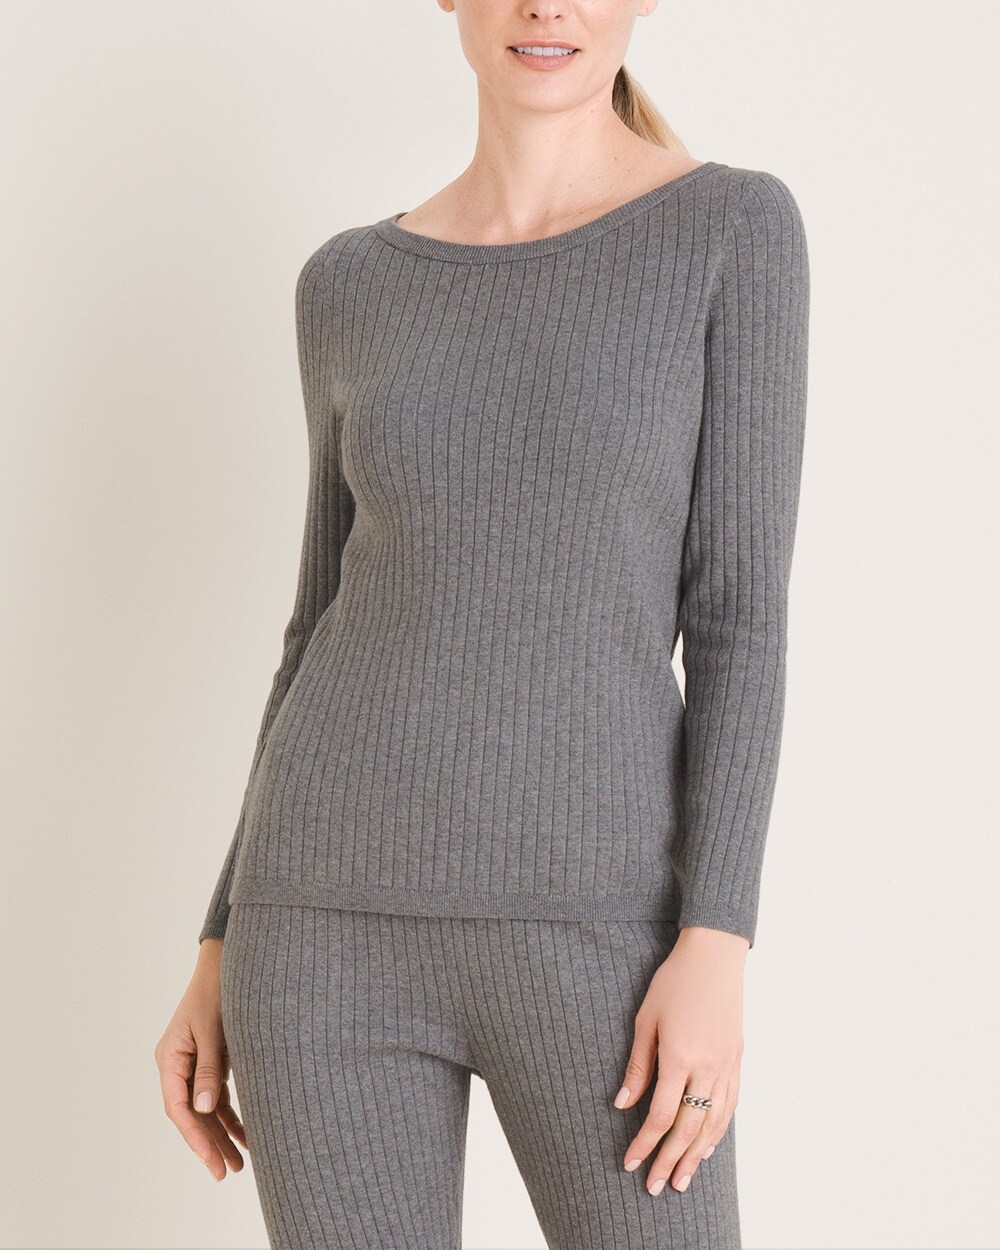 Zenergy Cotton-Cashmere Blend Ribbed Top